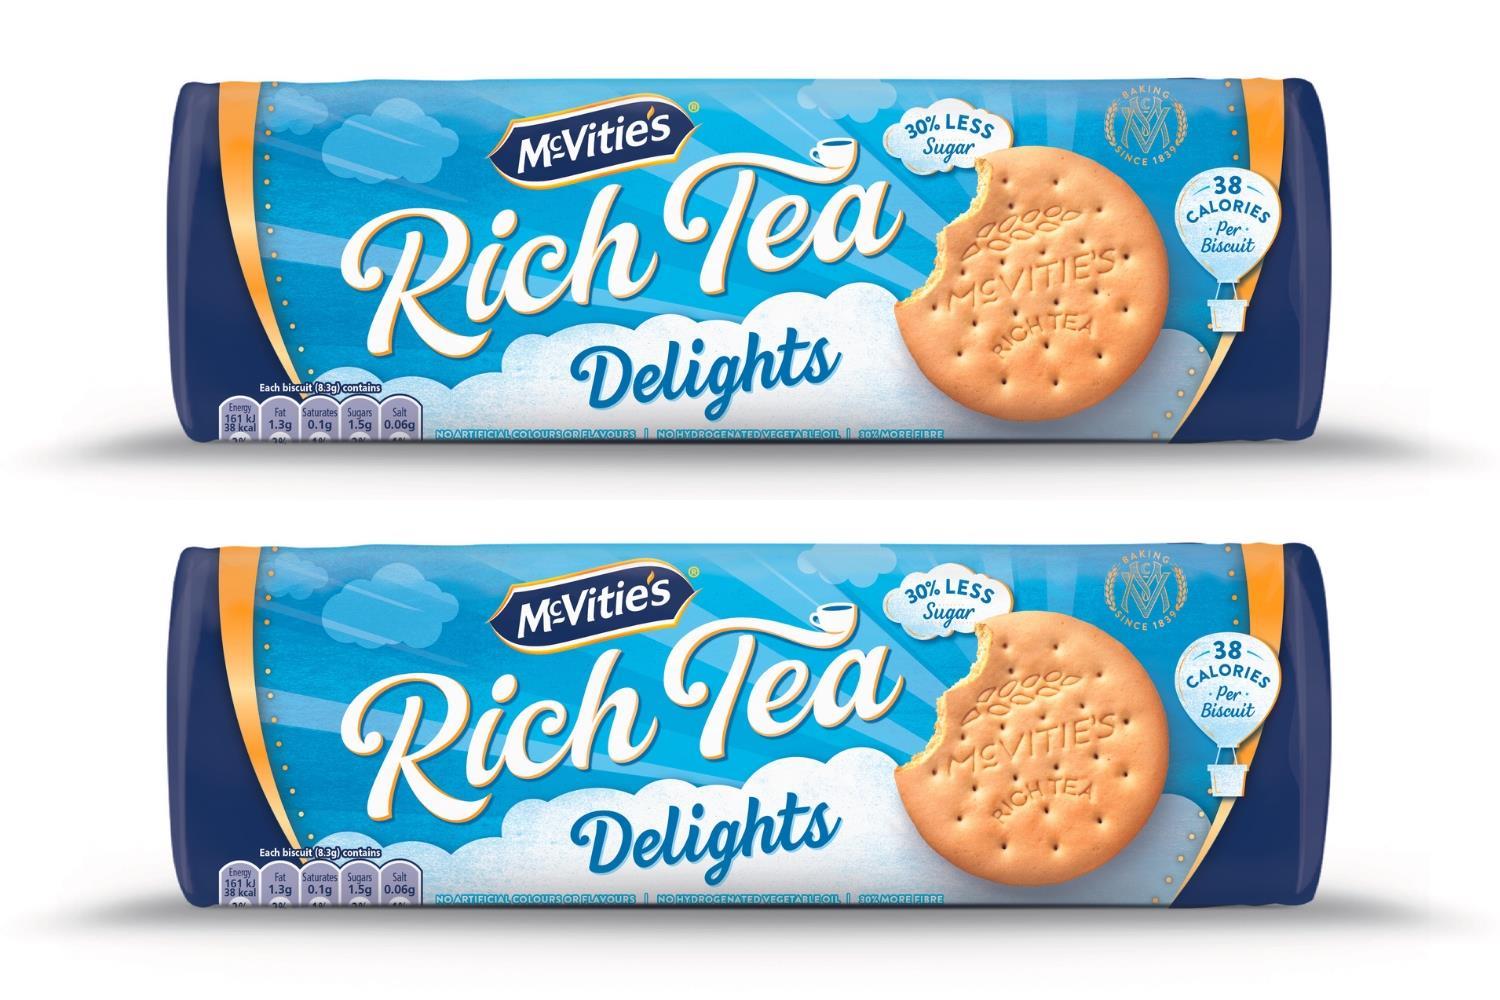 Marks & Spencer Rich Tea Biscuits 300g (Pack of 2) 